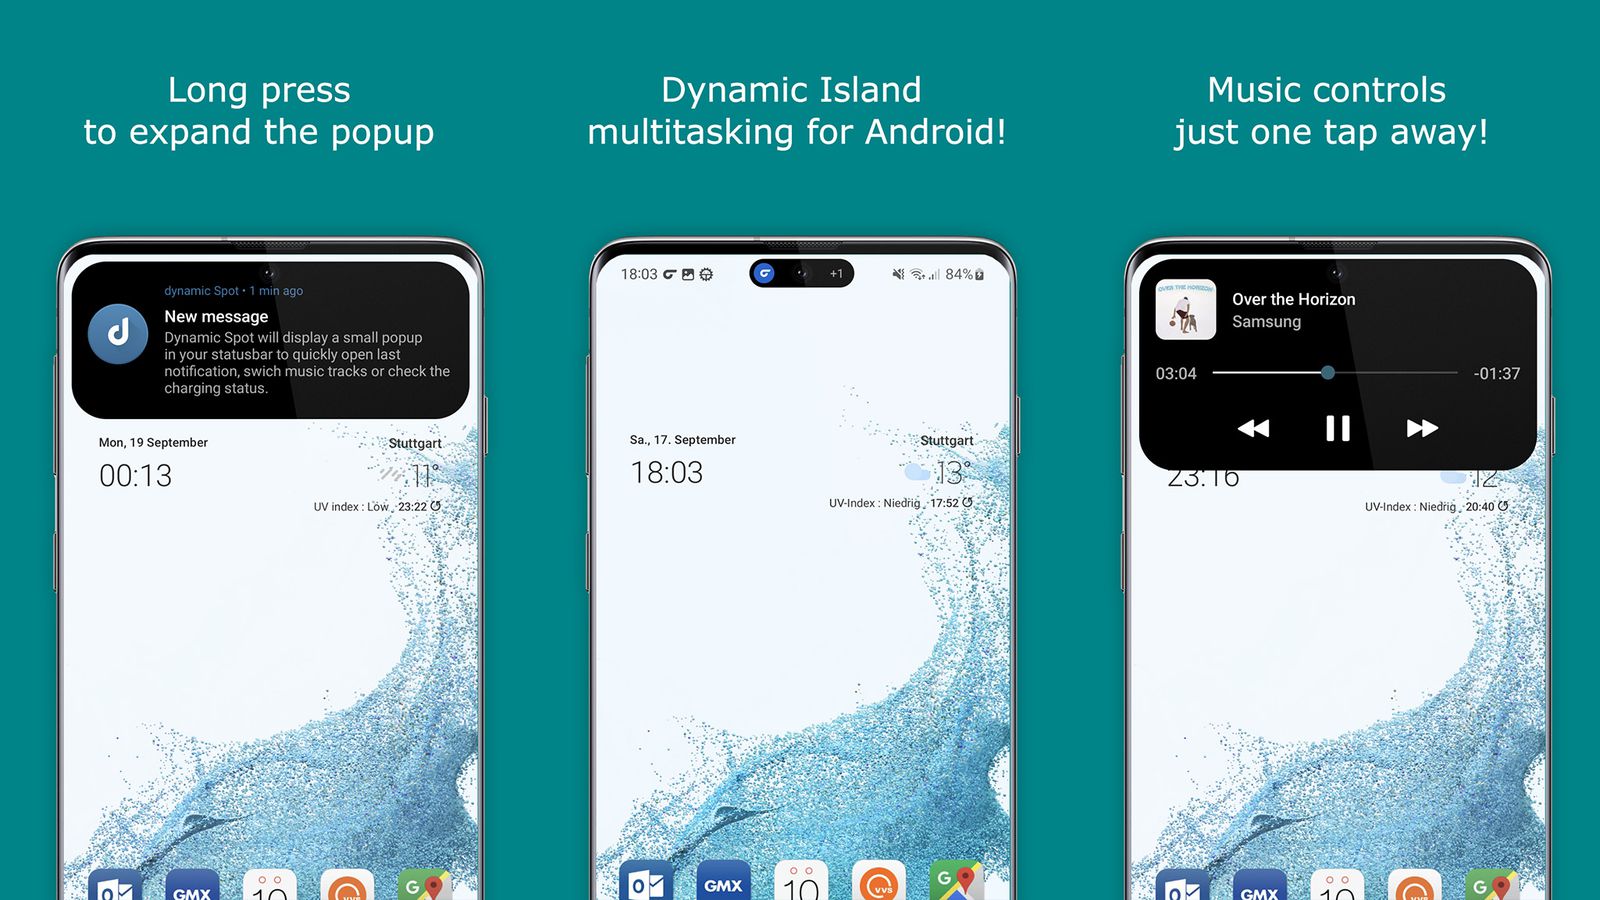 Dynamic Island For Android Users Feature | Android | แอปเลียนแบบ Dynamic Island พร้อมให้ใช้งานแล้วบน Android!